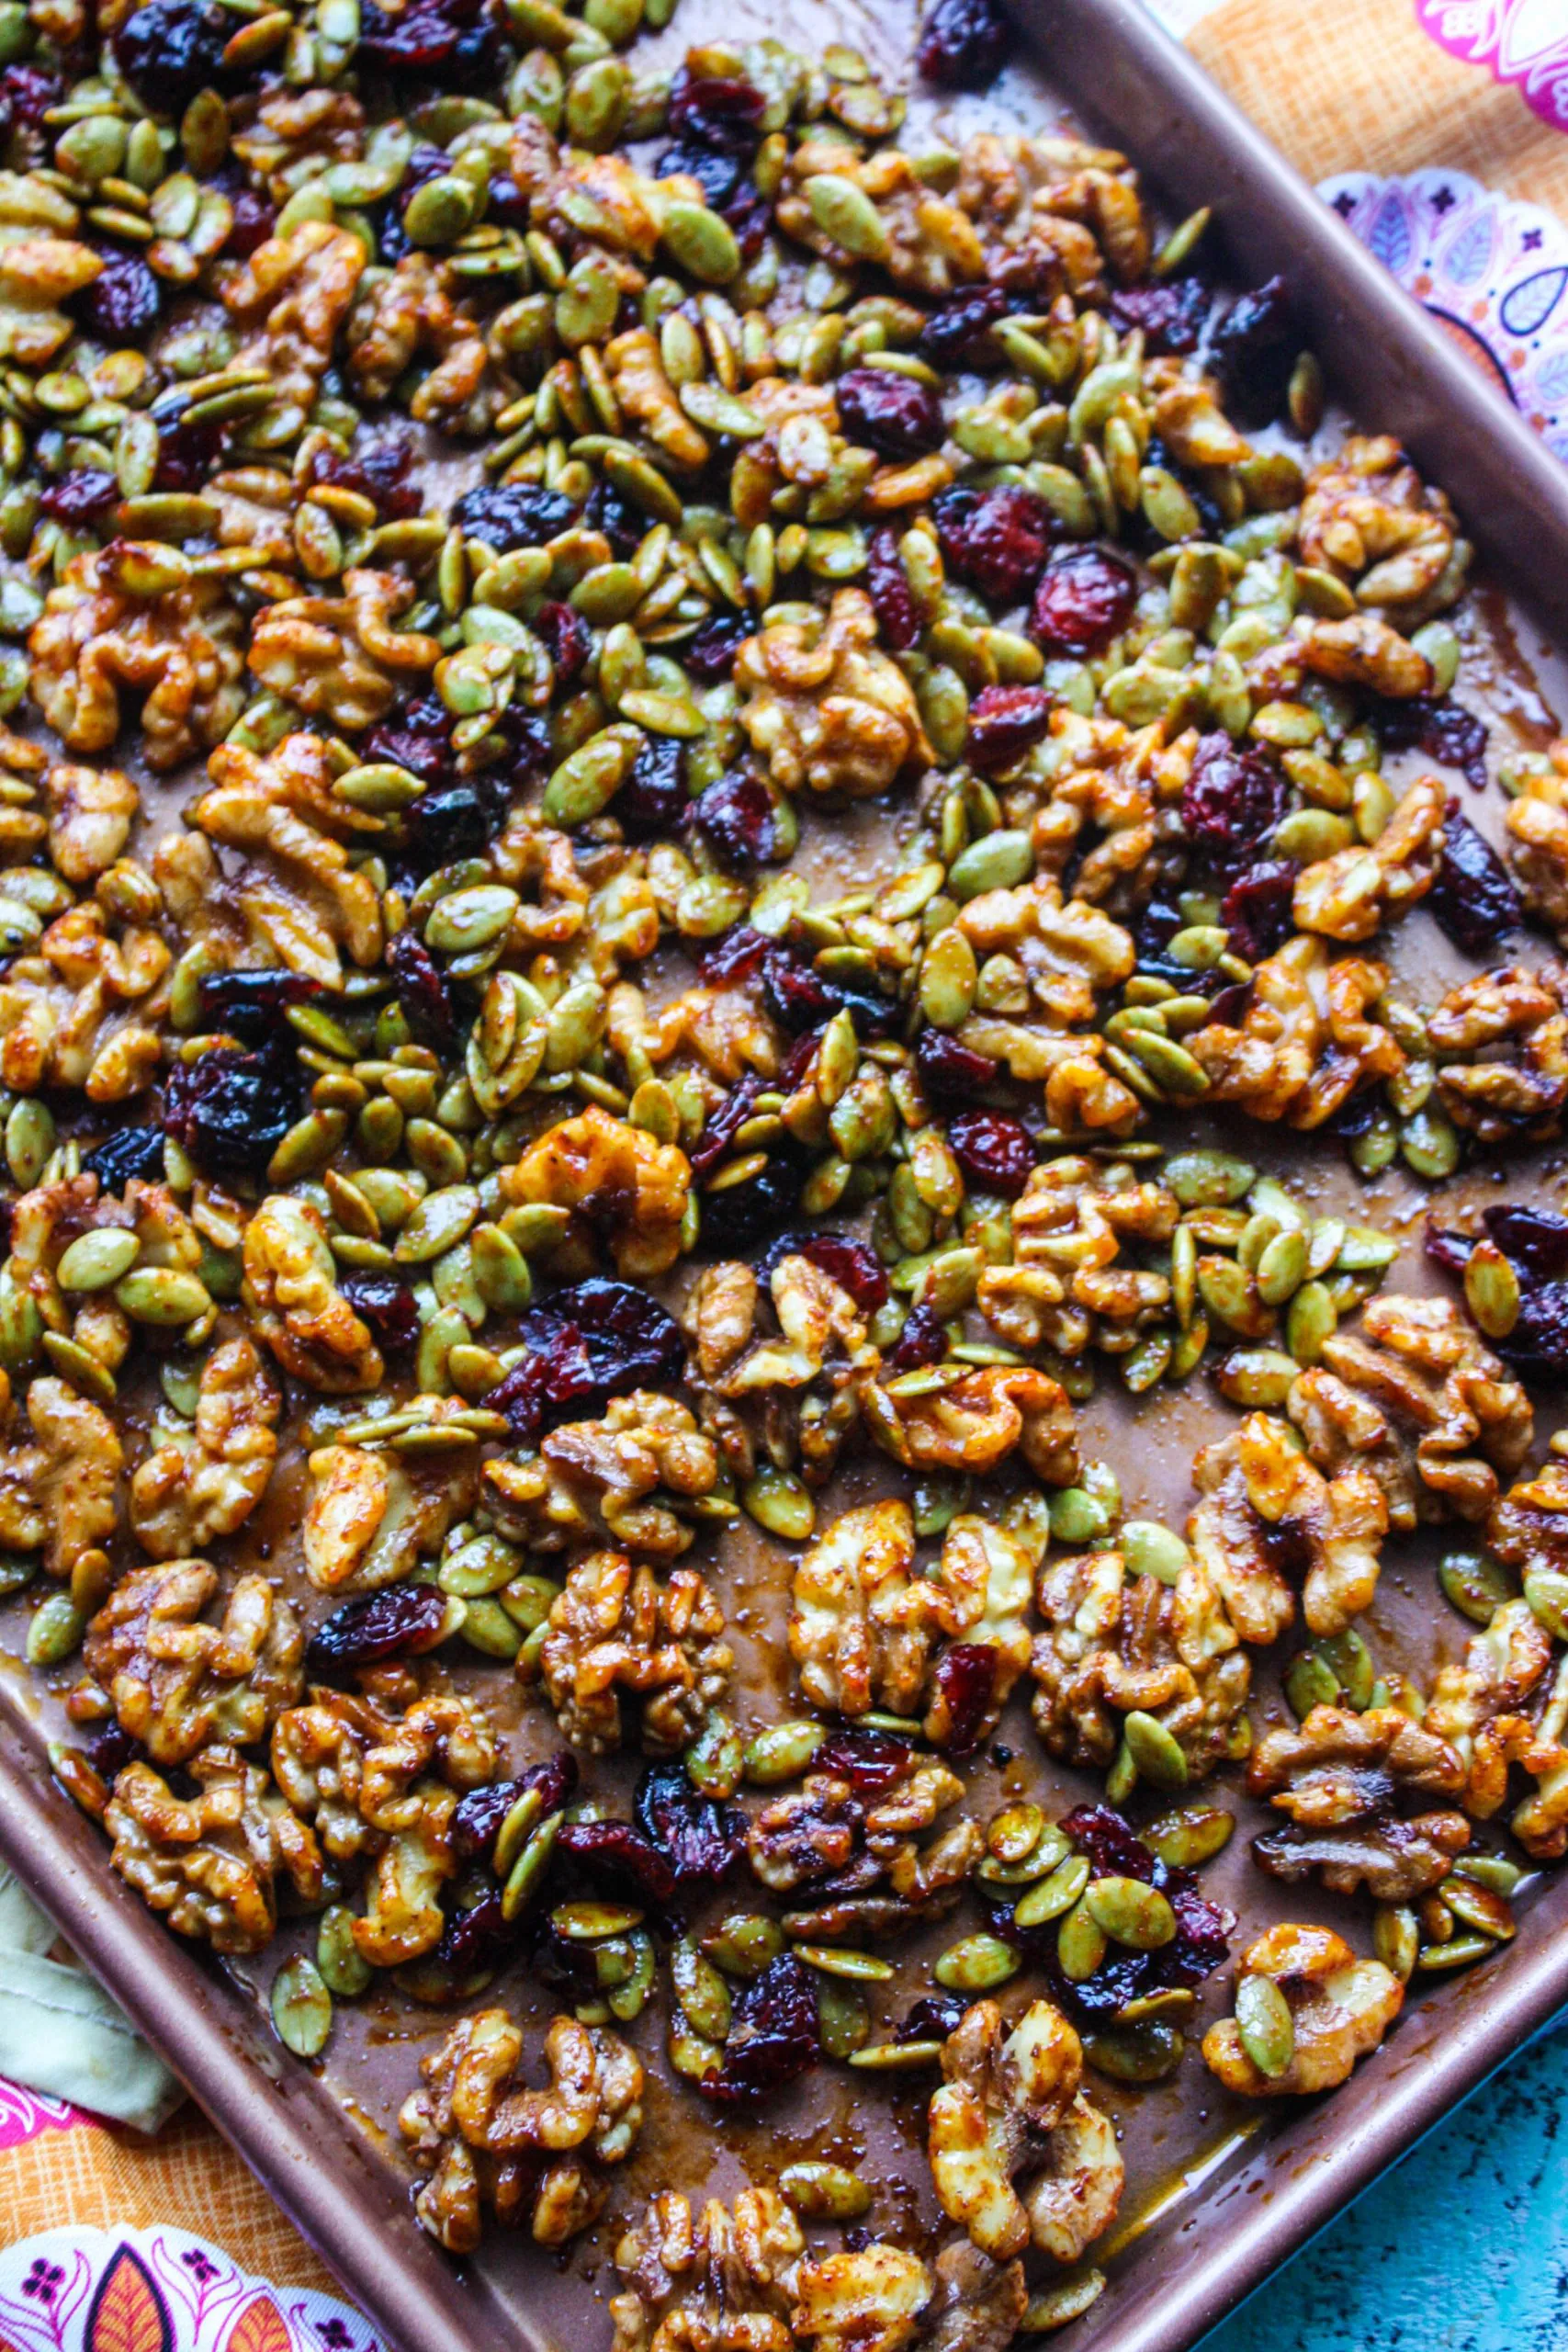 Pan of Sweet, Spicy & Citrus Roasted Walnut Mix for a great snack!